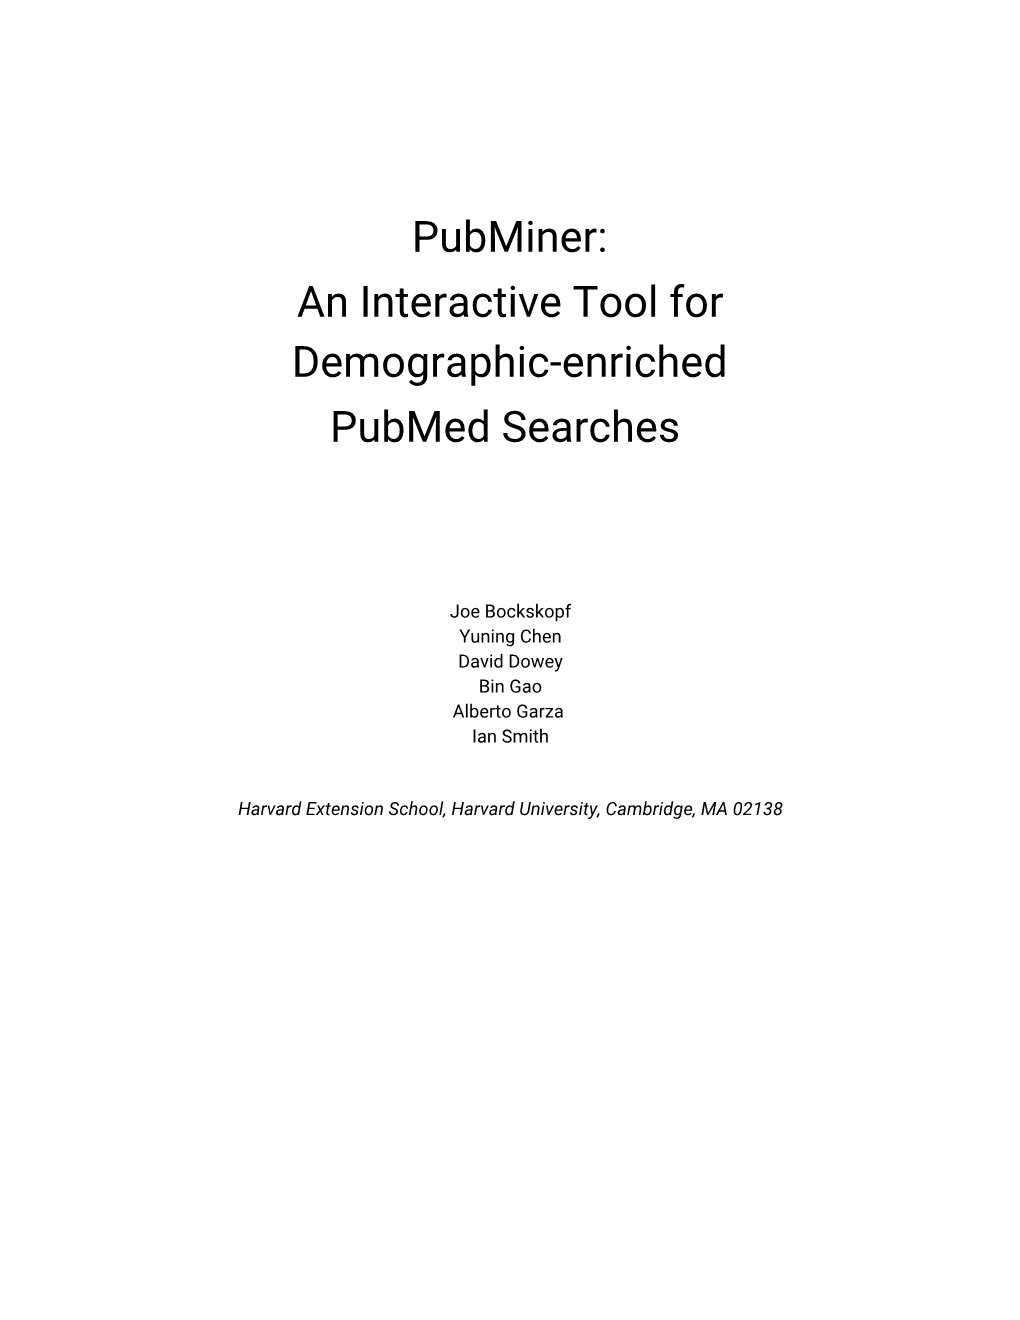 Pubminer: an Interactive Tool for Demographic-Enriched Pubmed Searches